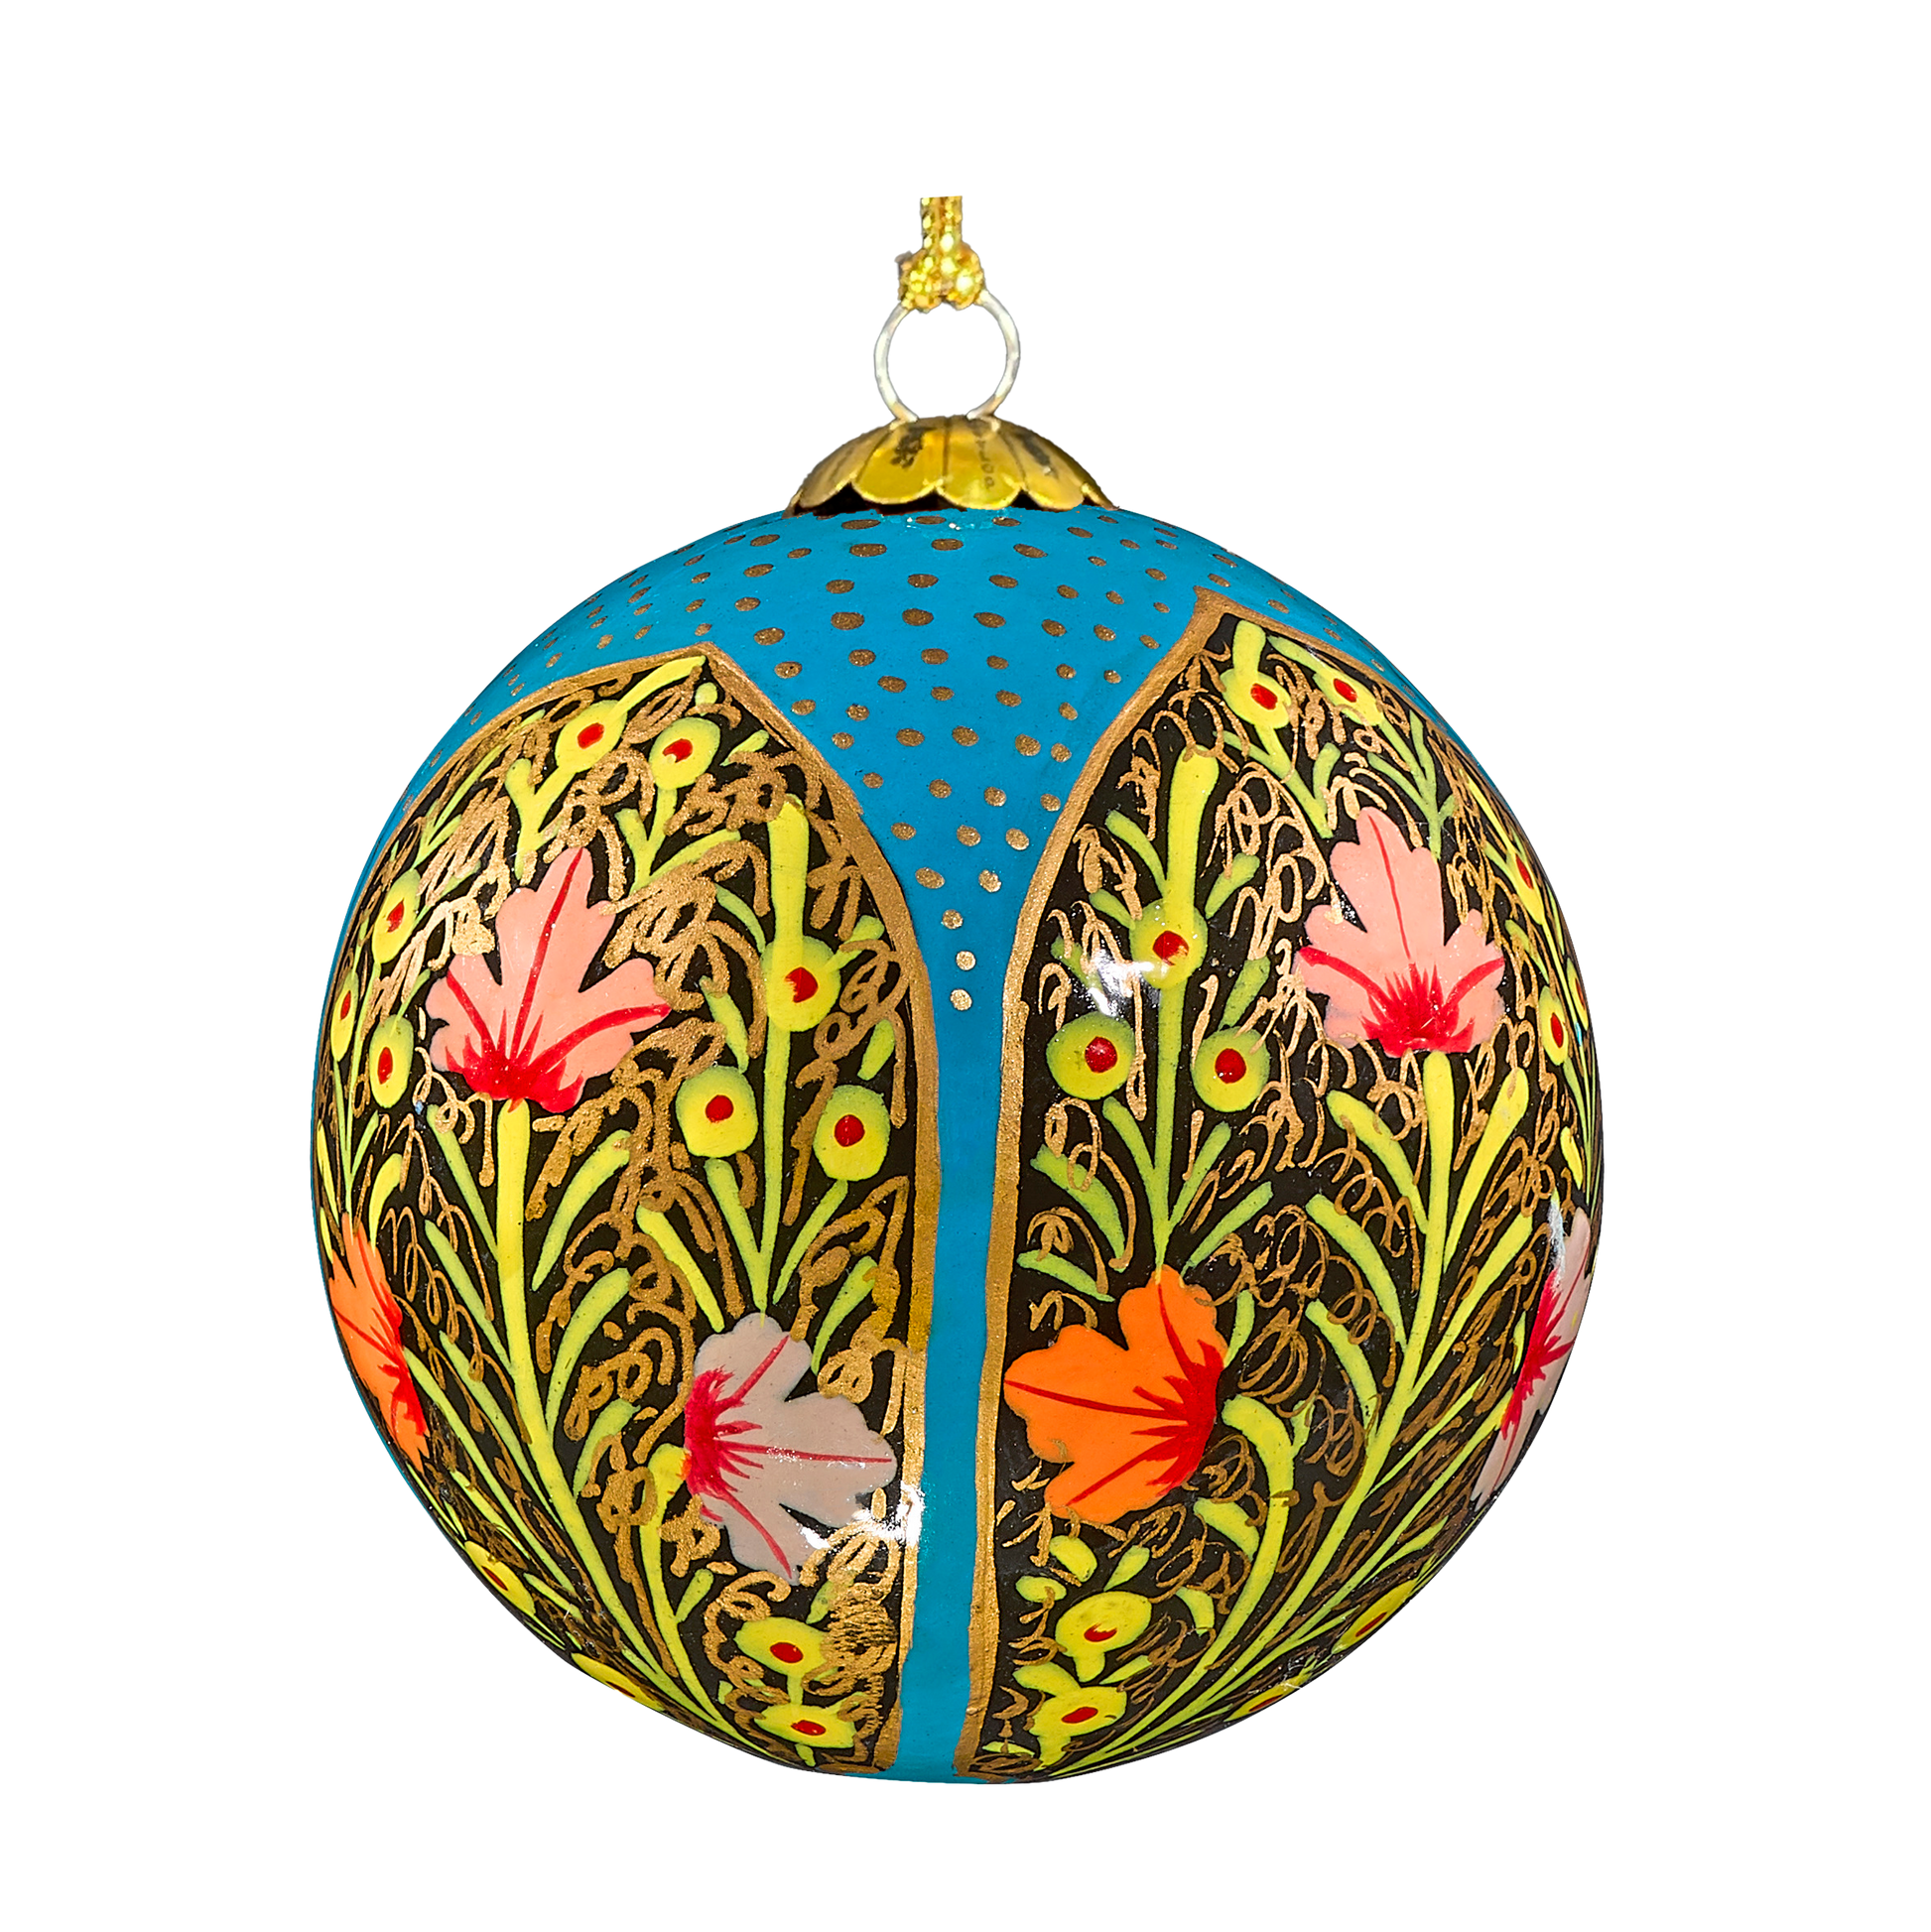 blue Chinar temple Christmas Bauble for Christmas tree decorations